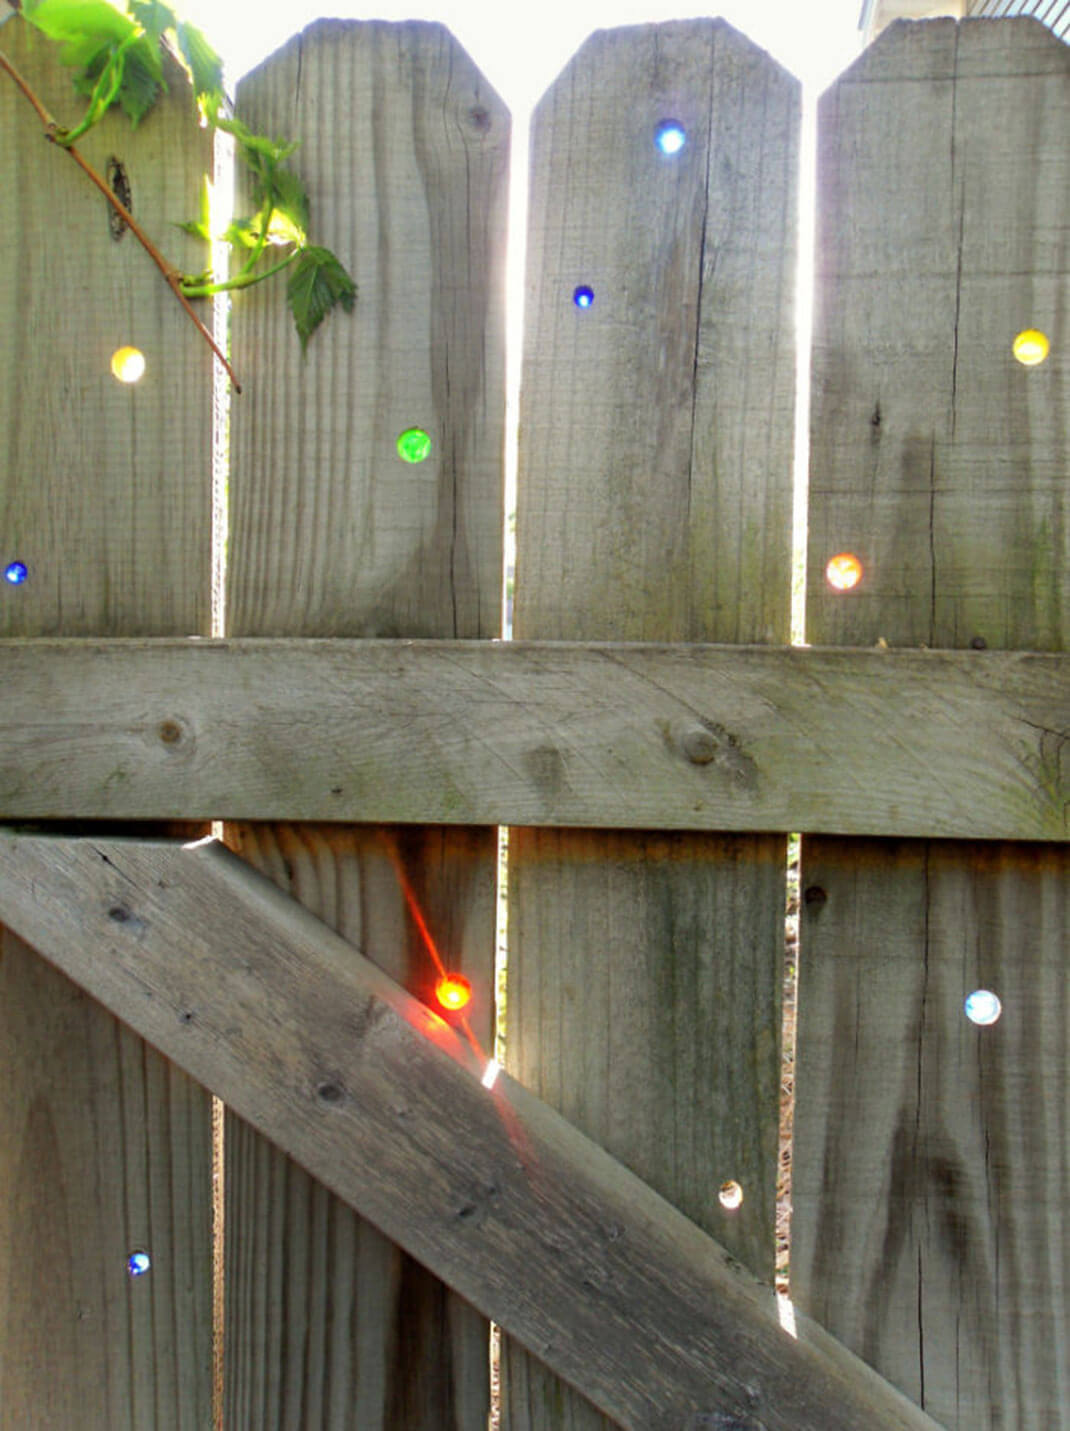 Fill in Fence Holes with Glass Gems